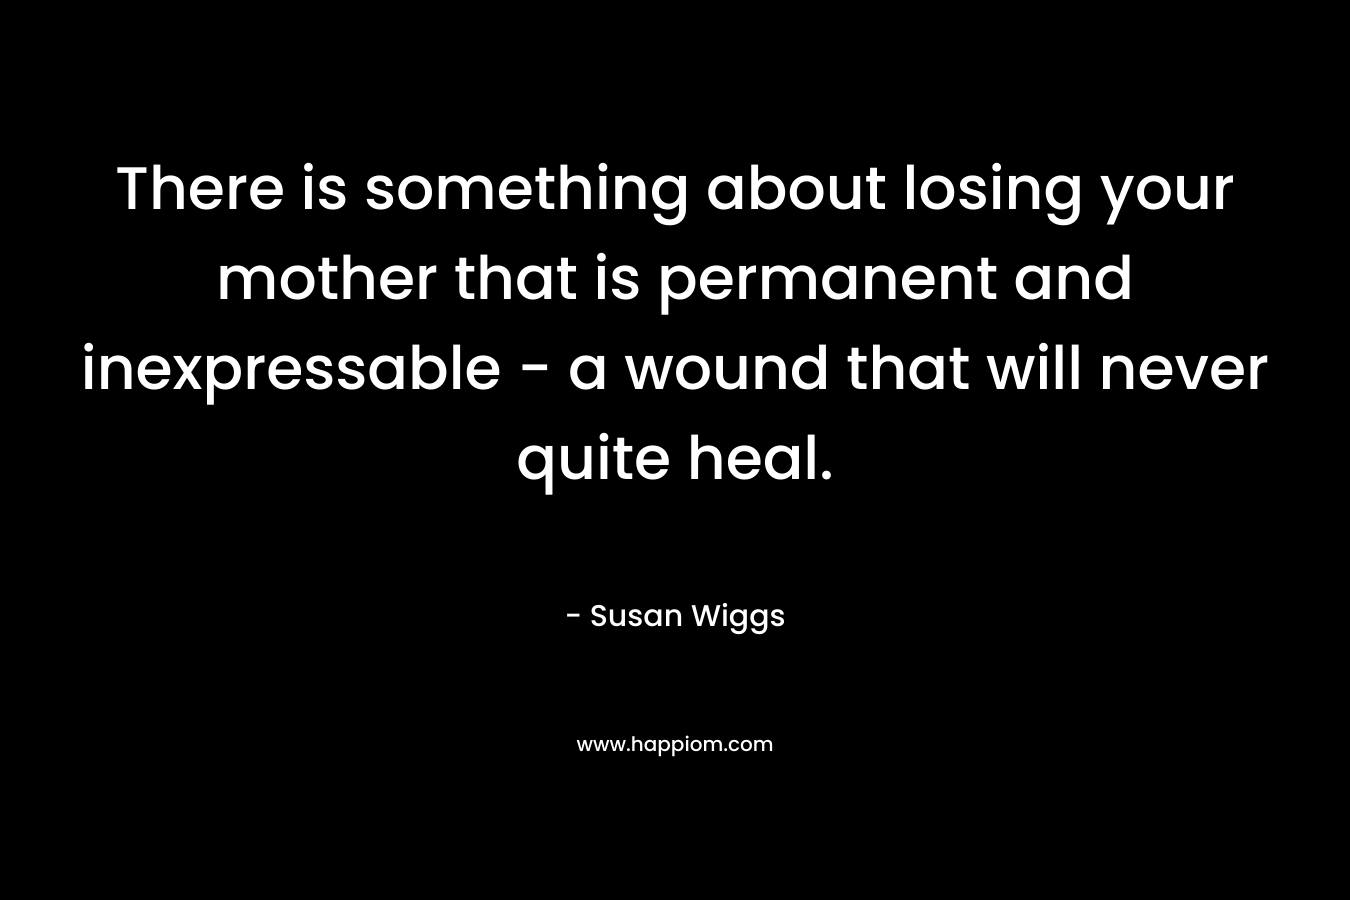 There is something about losing your mother that is permanent and inexpressable – a wound that will never quite heal. – Susan Wiggs